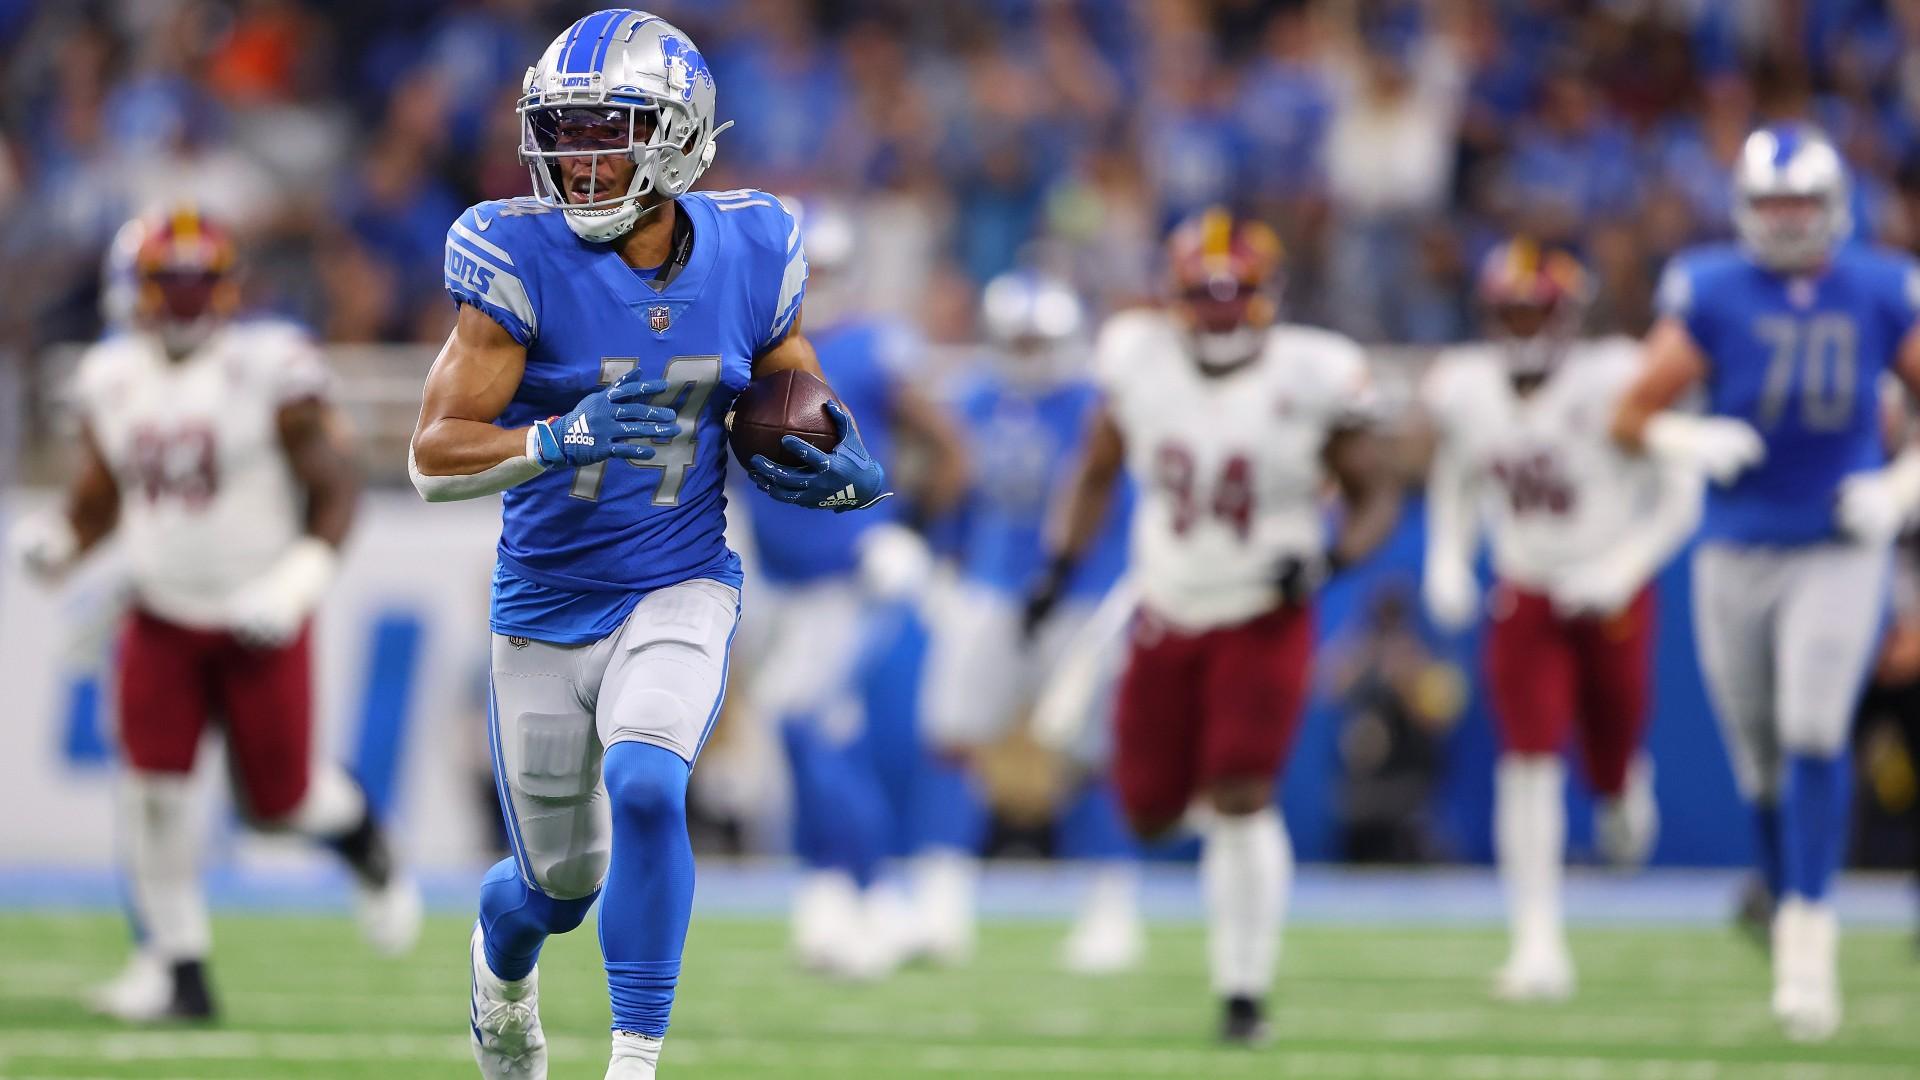 Amon Ra St. Brown, By The Numbers: Lions WR Continues Dominant Streak With Big Day Vs. Commanders